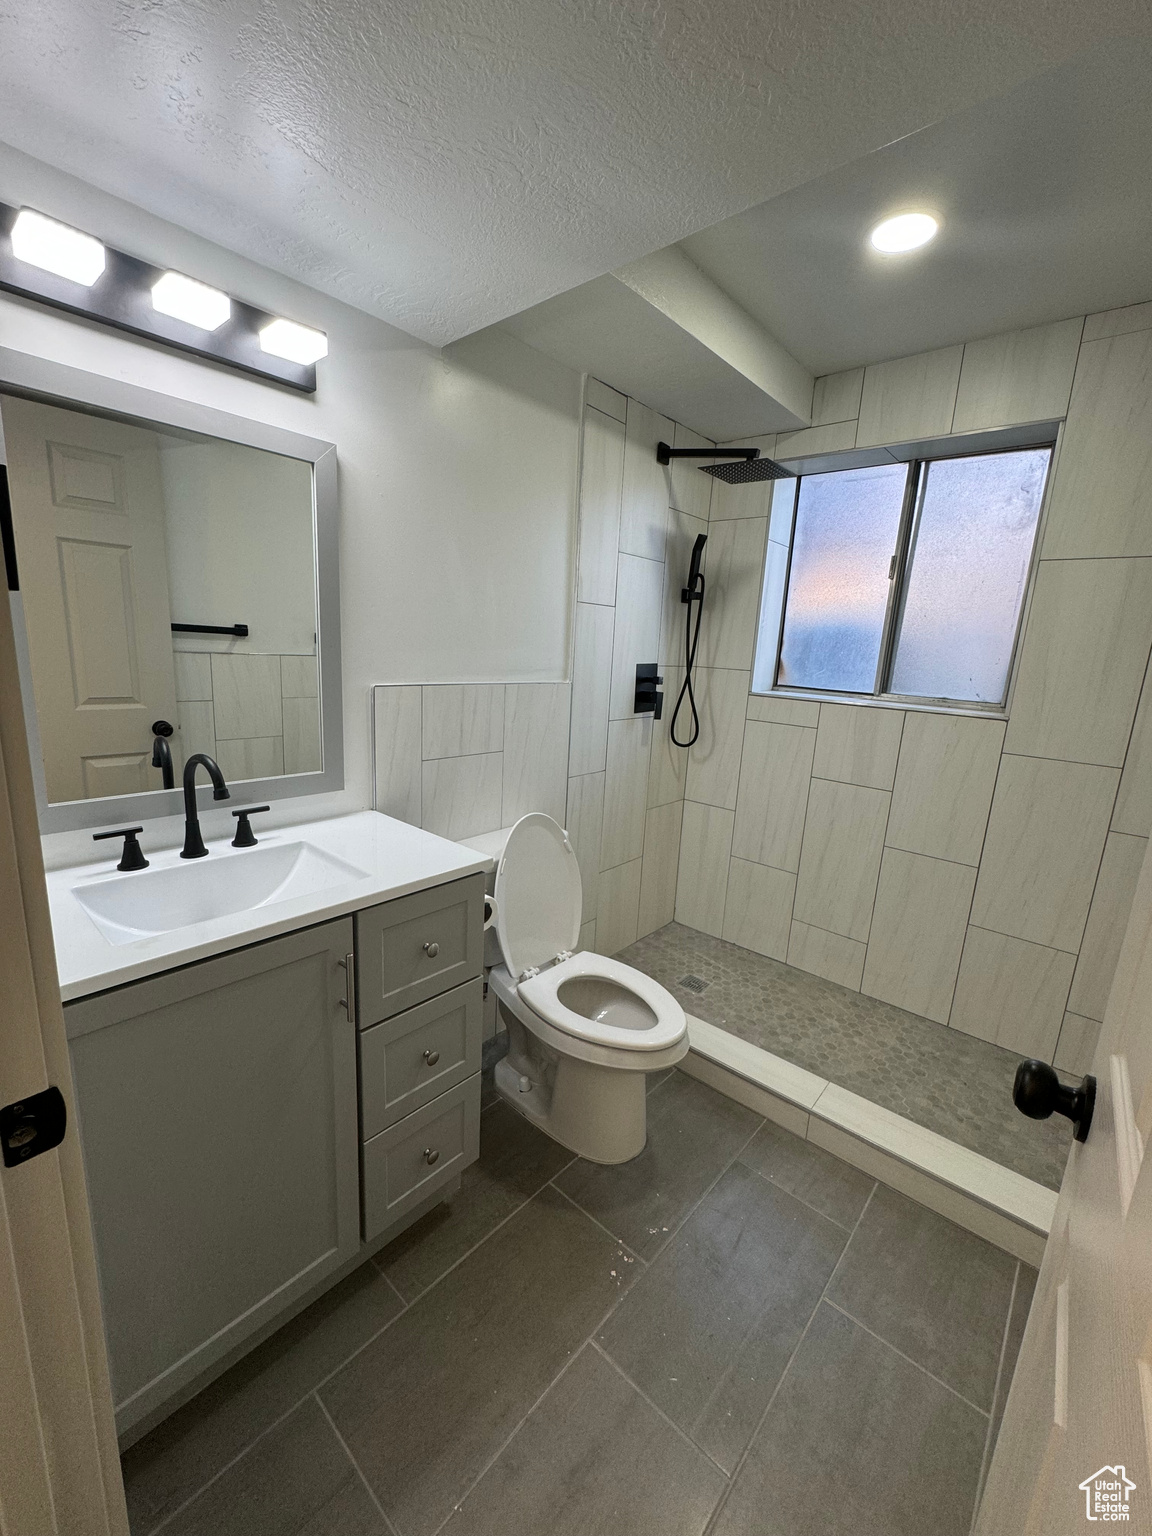 Bathroom with toilet, a textured ceiling, vanity, tile floors, and a tile shower